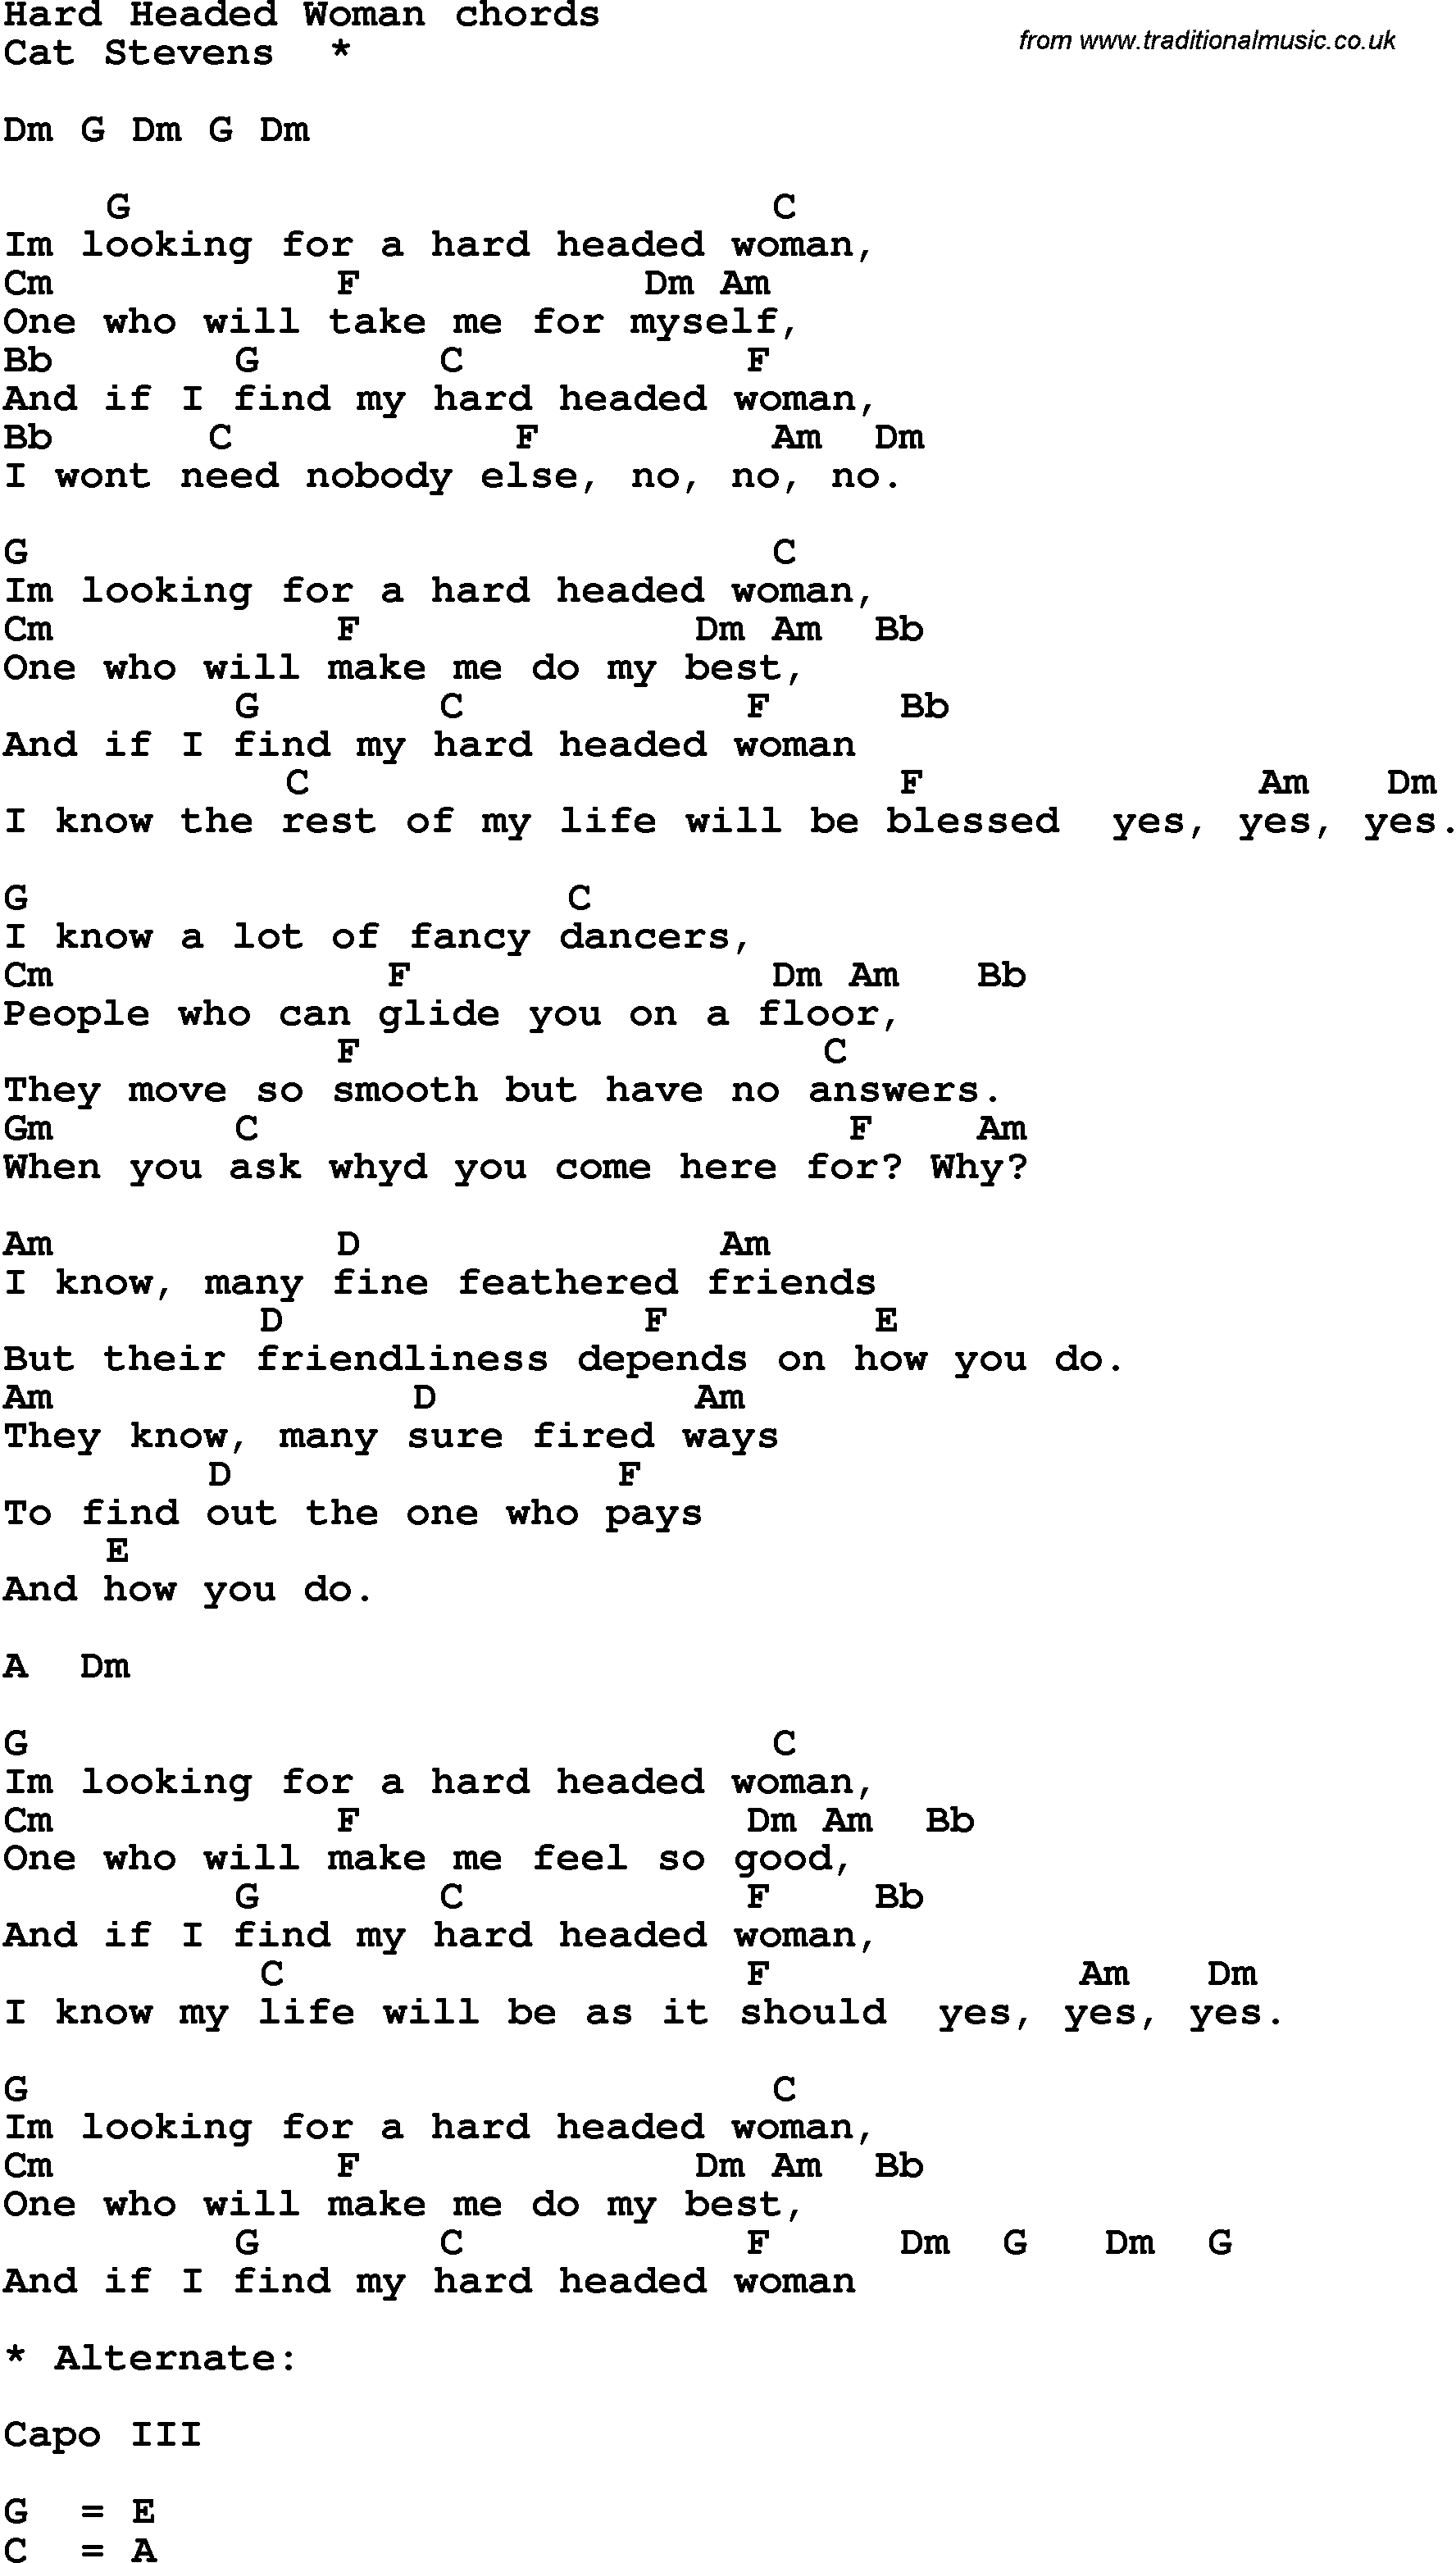 Song Lyrics with guitar chords for Hard Headed Woman